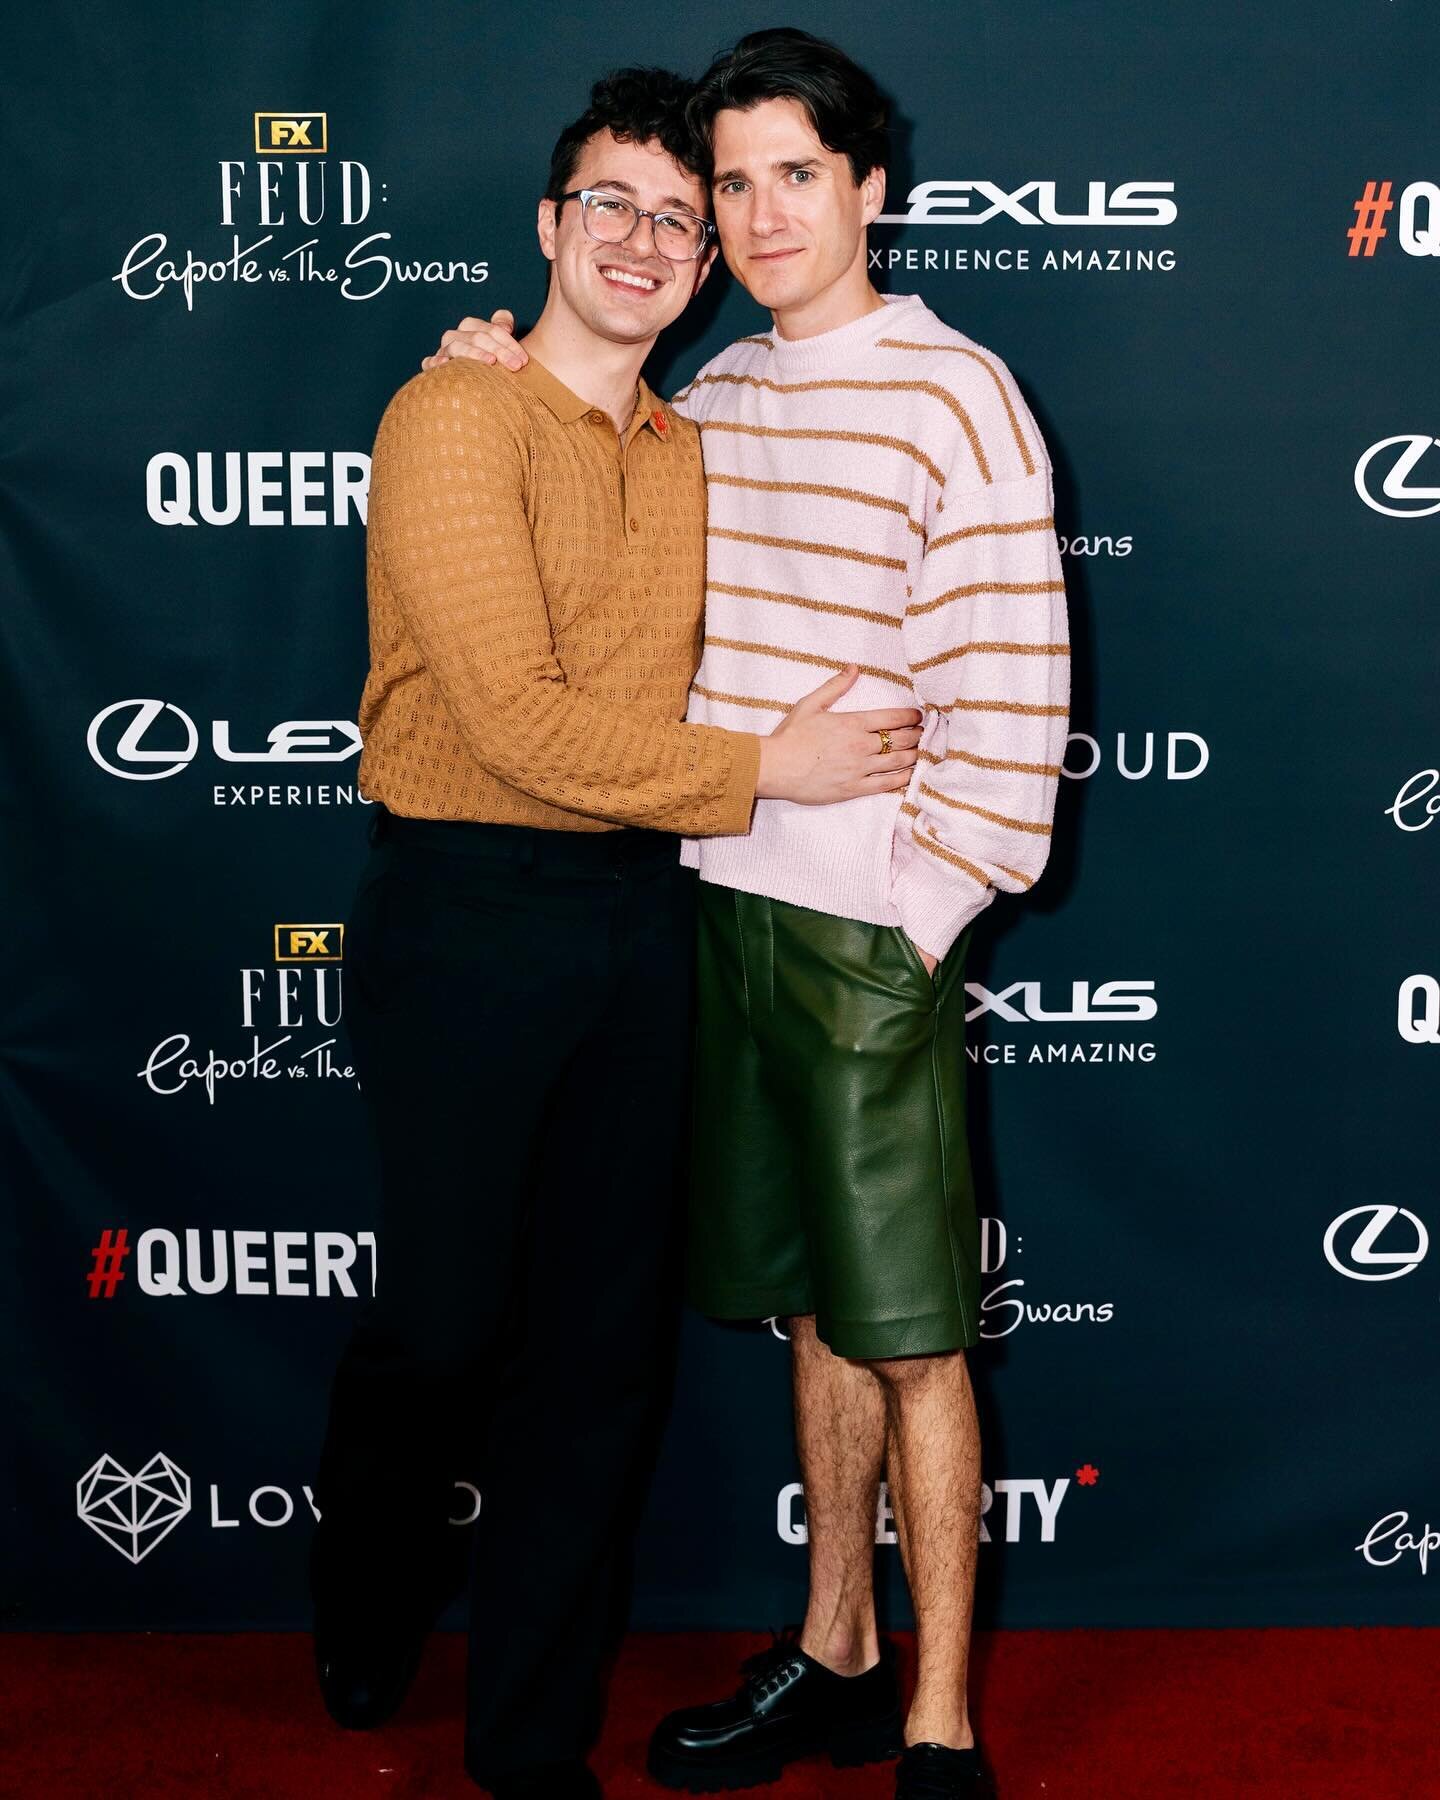 Gayest night of the year #Queerties 🥰